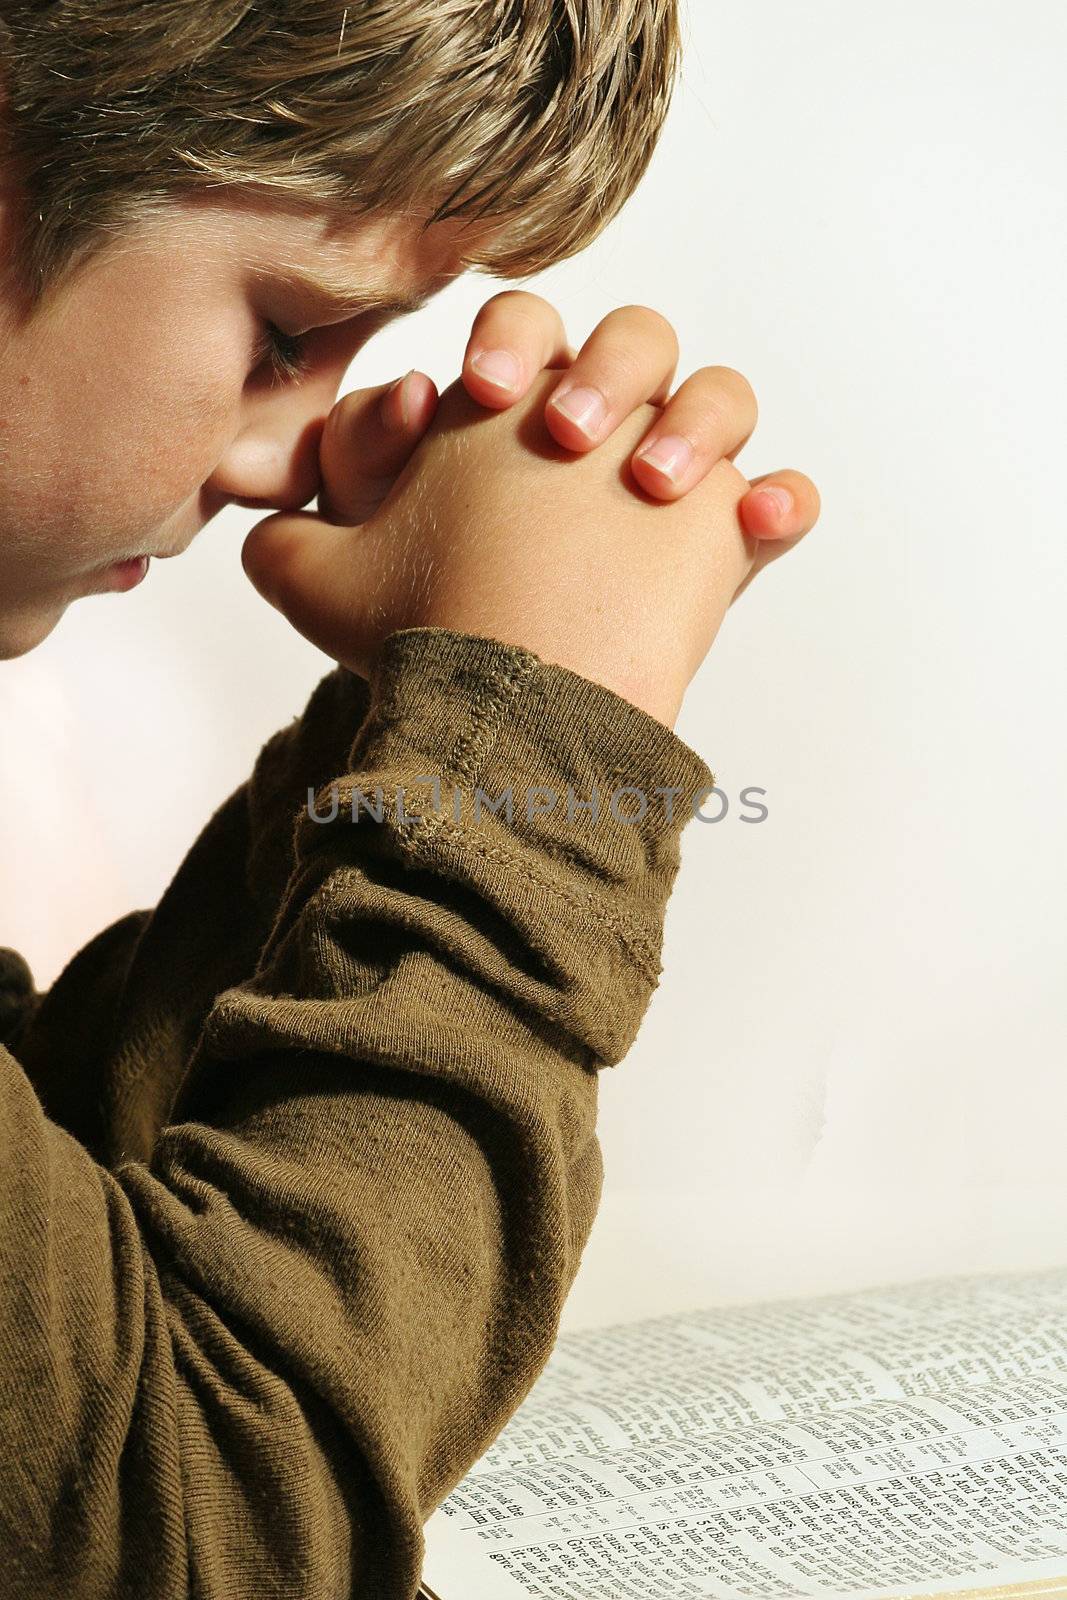 shot of a young boy praying over the bible on white